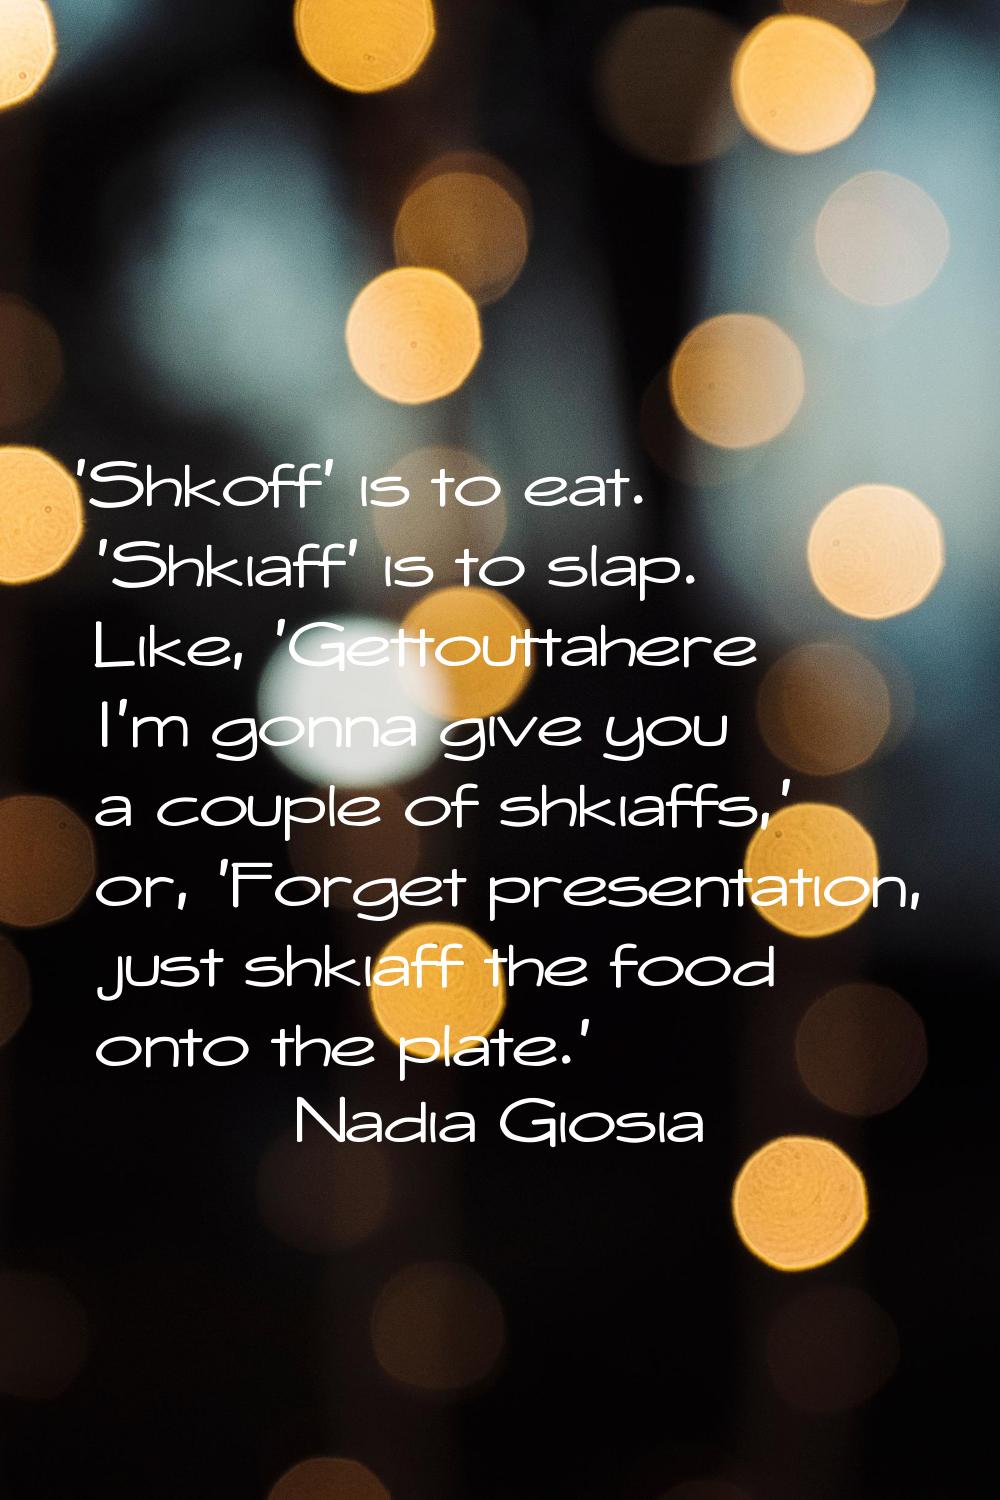 'Shkoff' is to eat. 'Shkiaff' is to slap. Like, 'Gettouttahere I'm gonna give you a couple of shkia